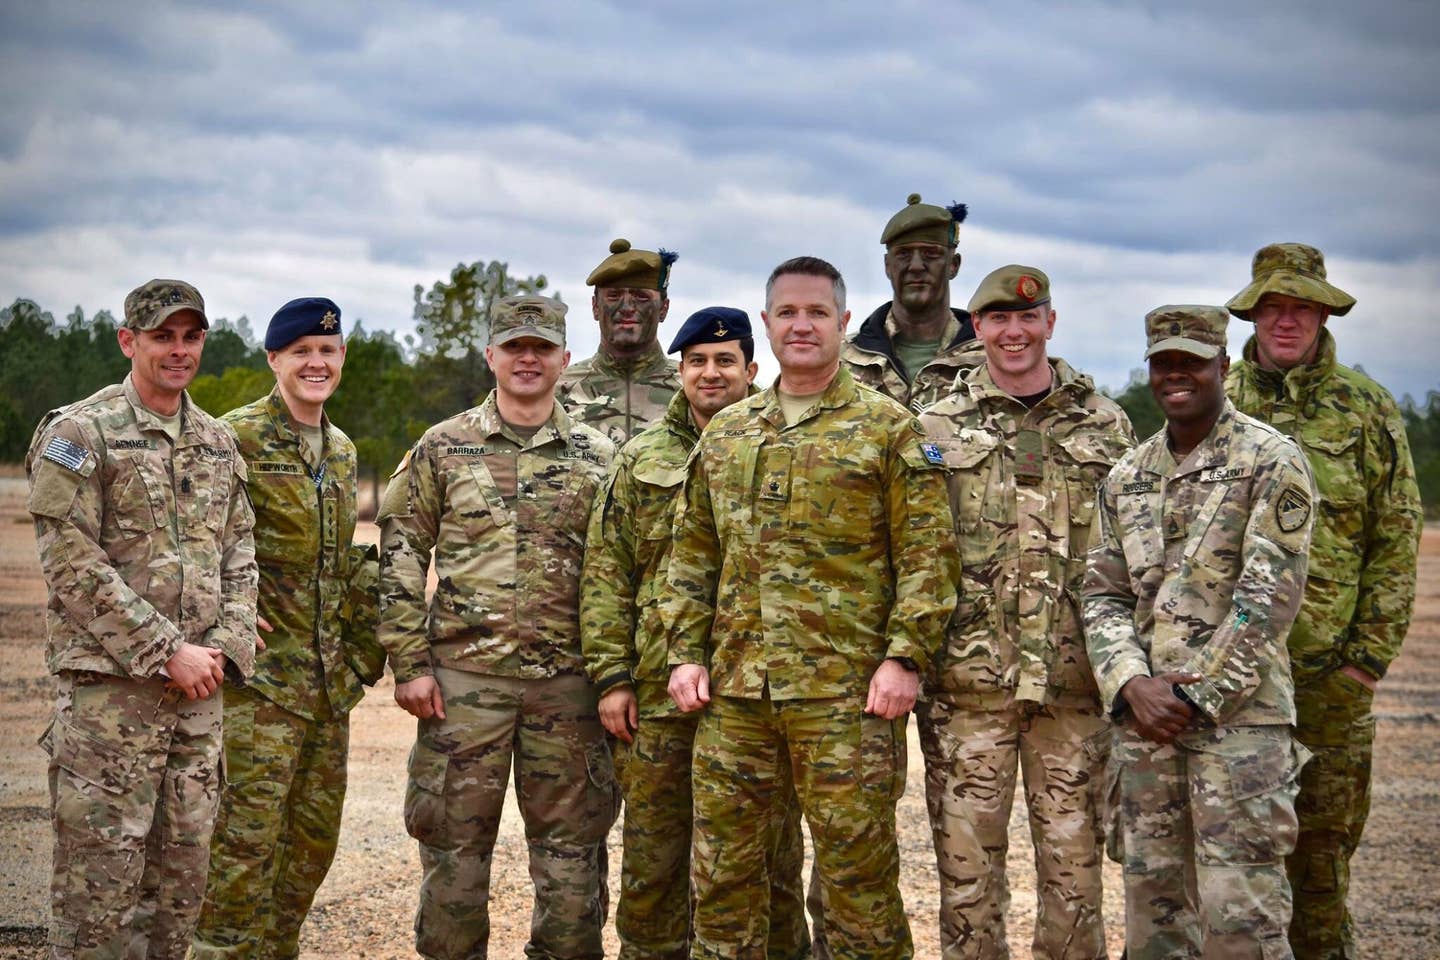 Members of the US Army, British Army, and Australian Army together during an exercise in 2018. <em>US Army</em>